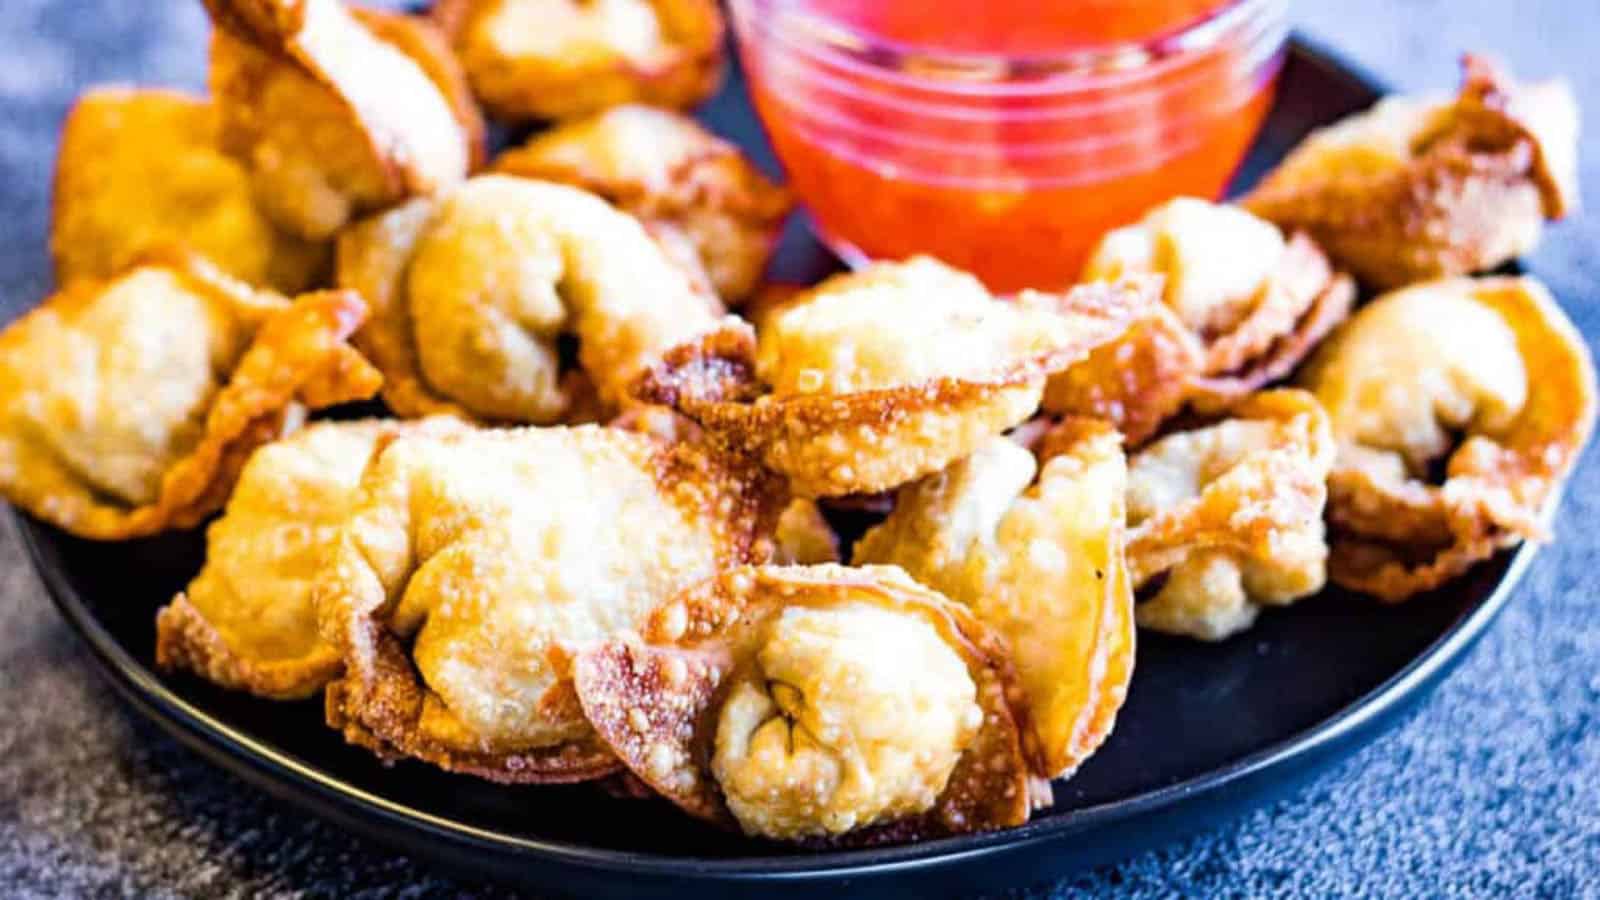 Fried wontons on a black plate with dipping sauce.